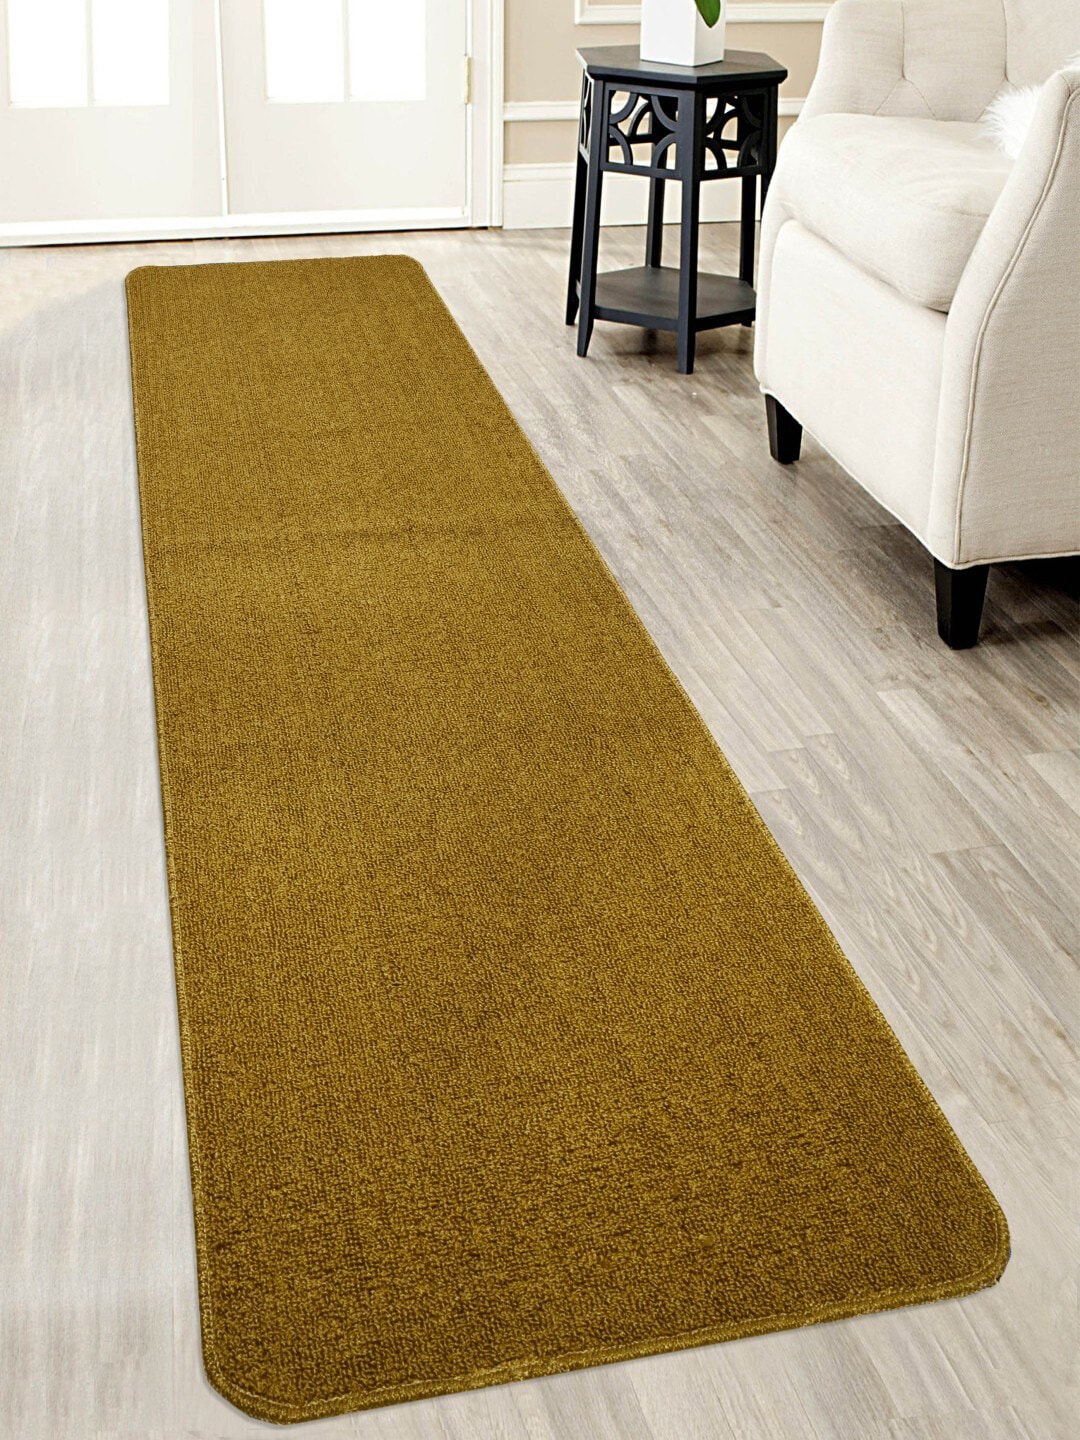 Saral Home Gold-Coloured Solid Anti-Skid Floor Runner Price in India